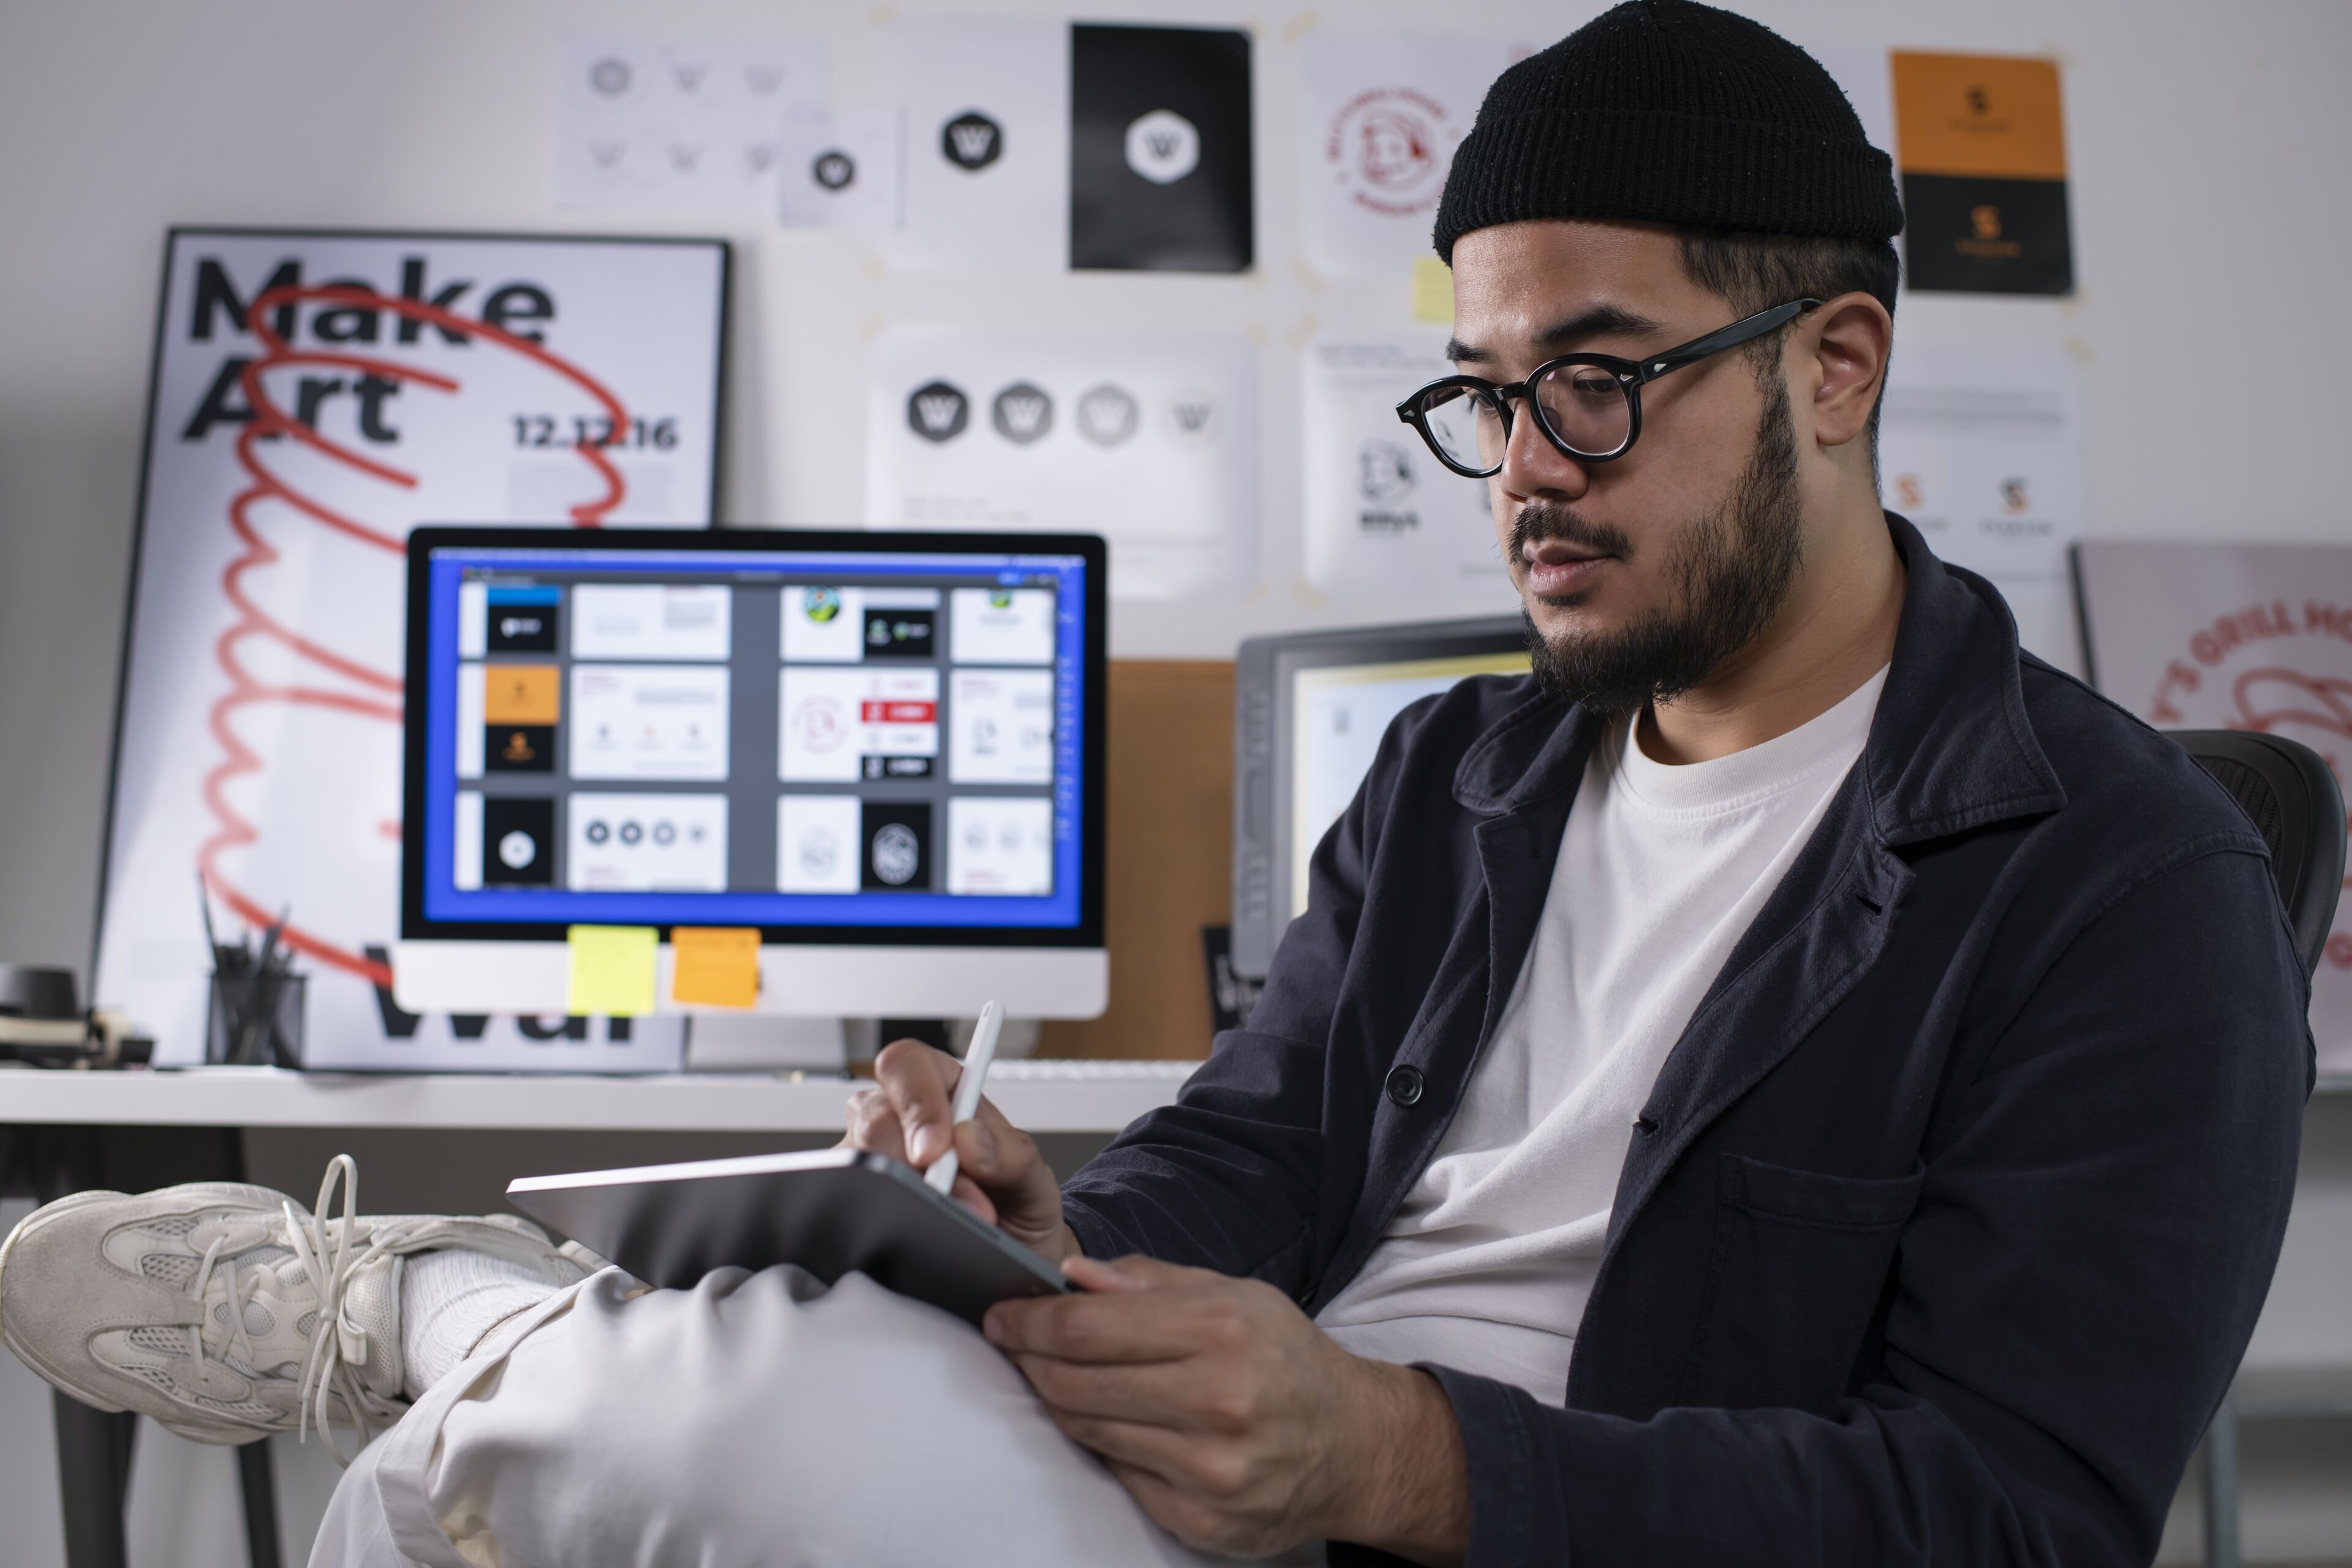 A focused male digital artist sketches on a tablet in a creative studio, surrounded by design inspirations.